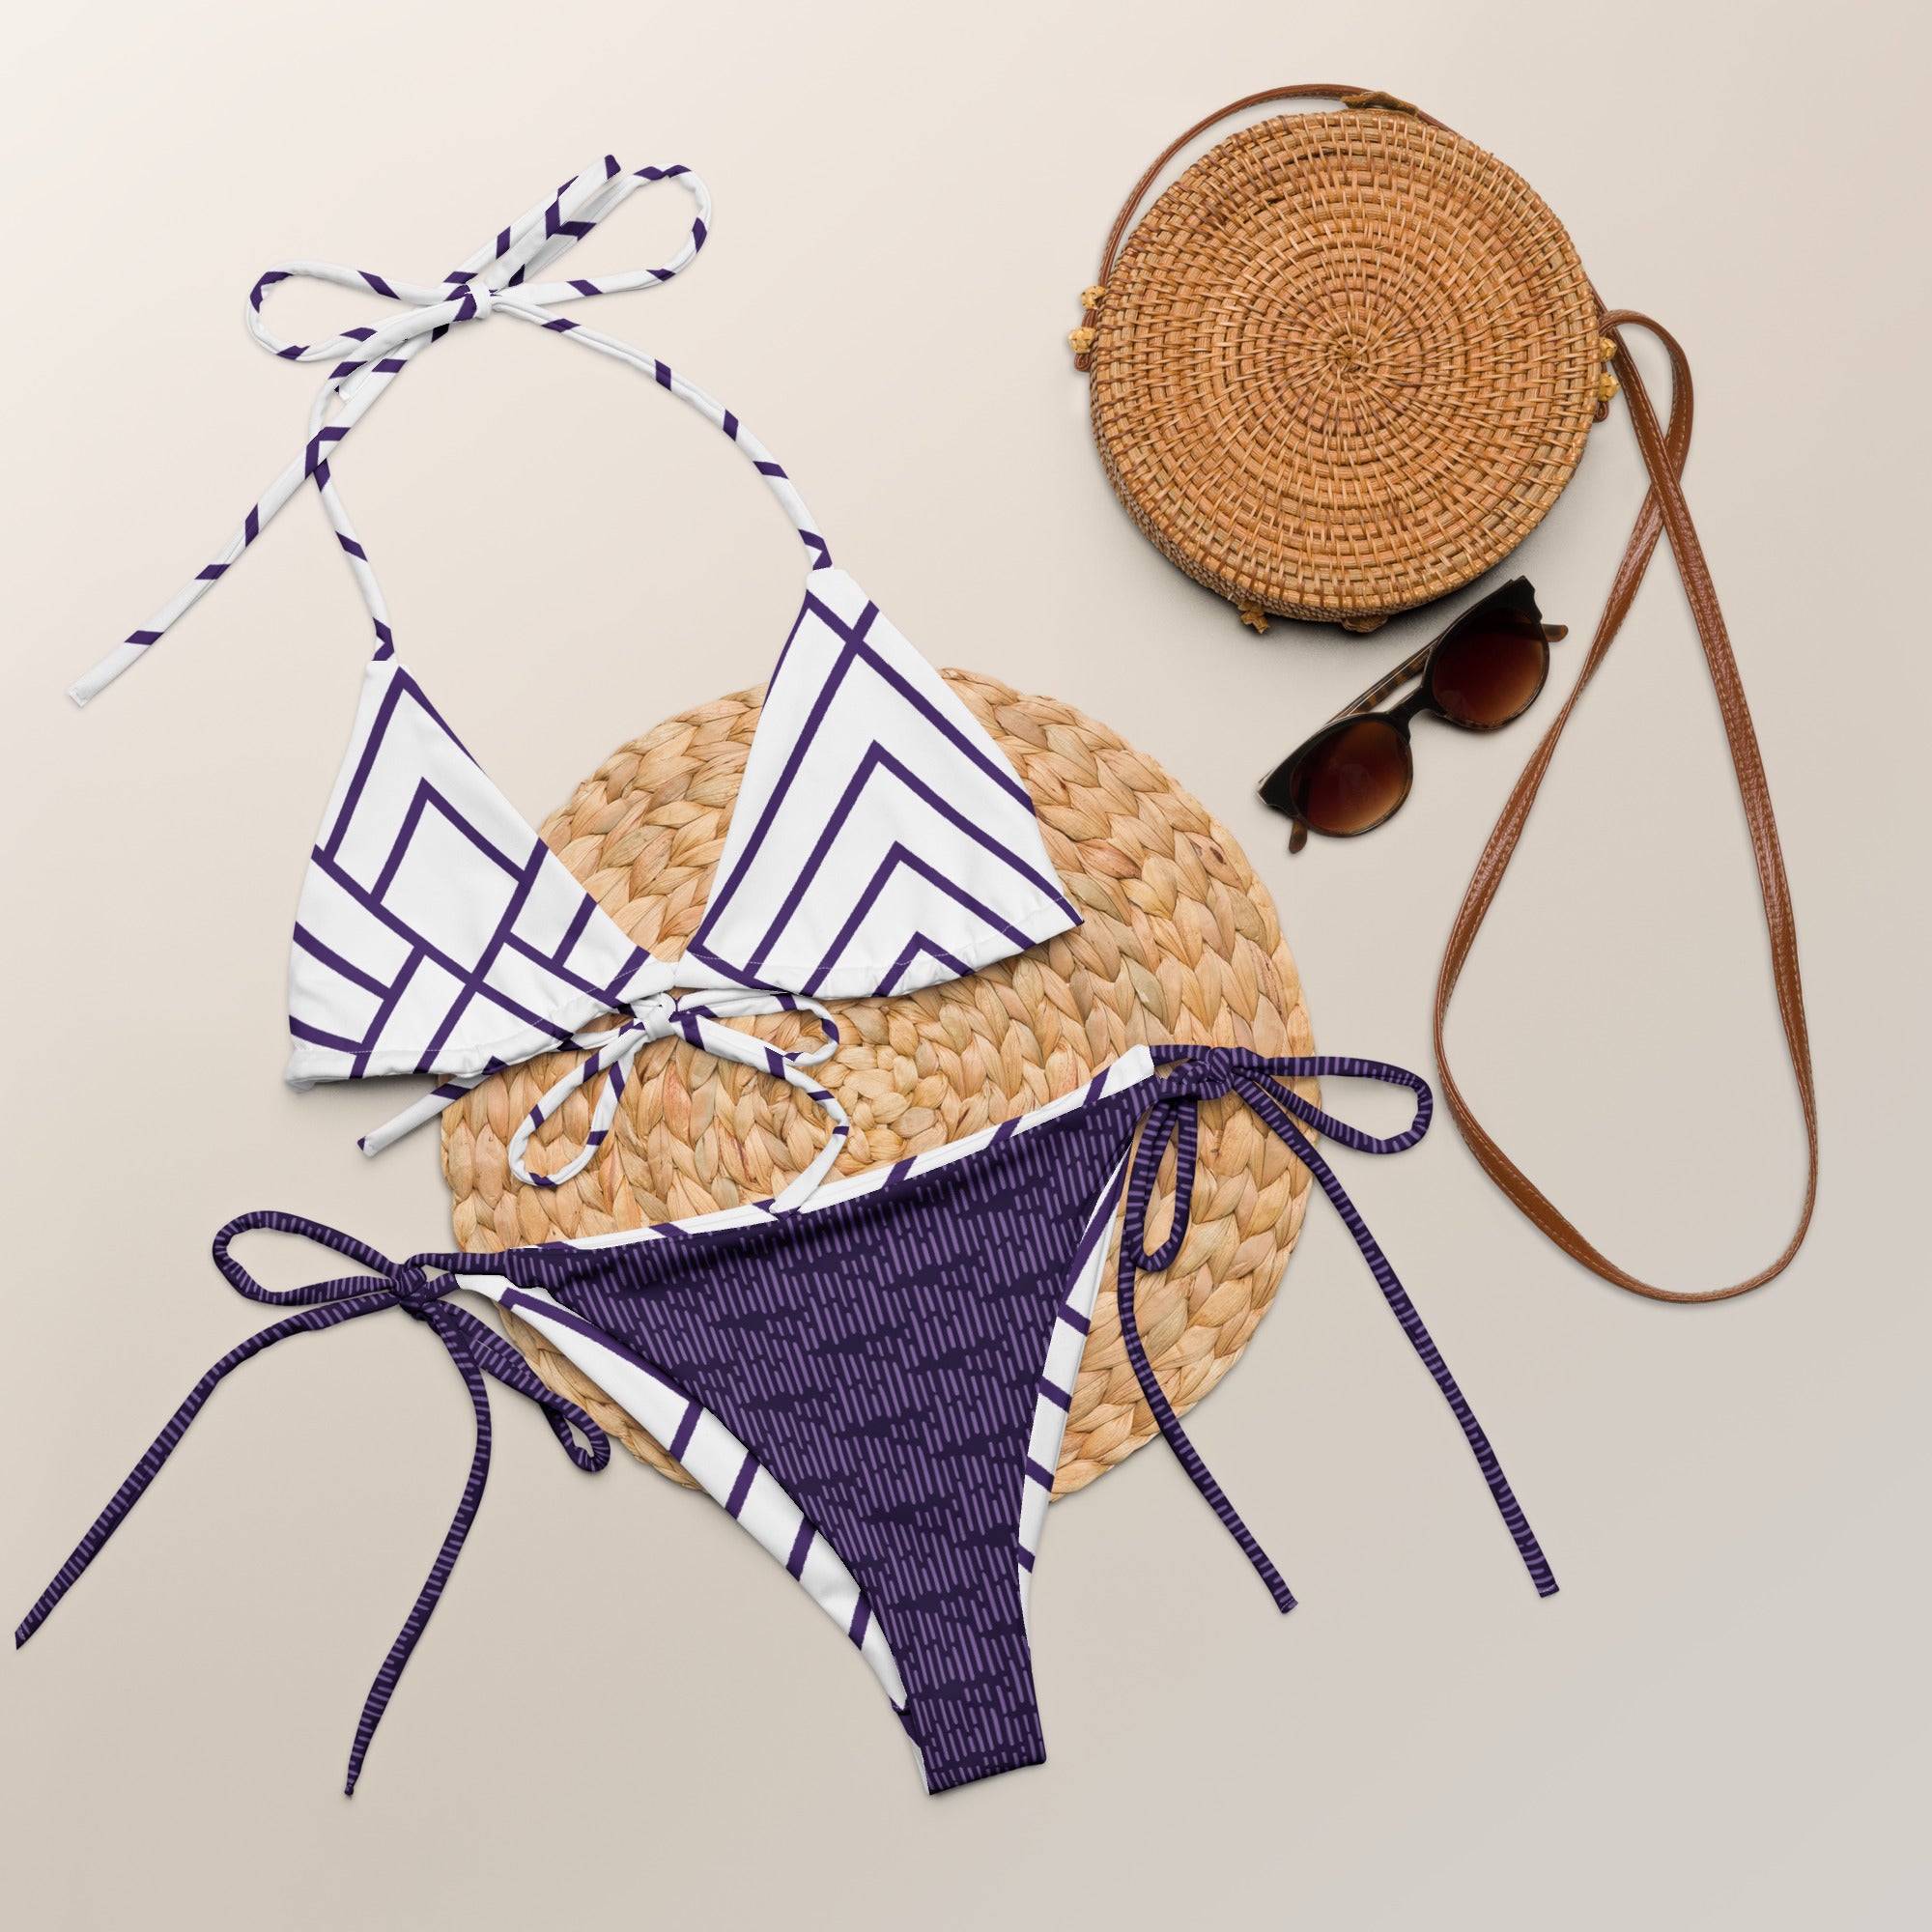 Lila Recycled String Bikini - Revive Wear     Lila Recycled Bikini features soft, durable material, adjustable straps, and removable padding for the perfect fit. Available in sizes for women of all shapes.